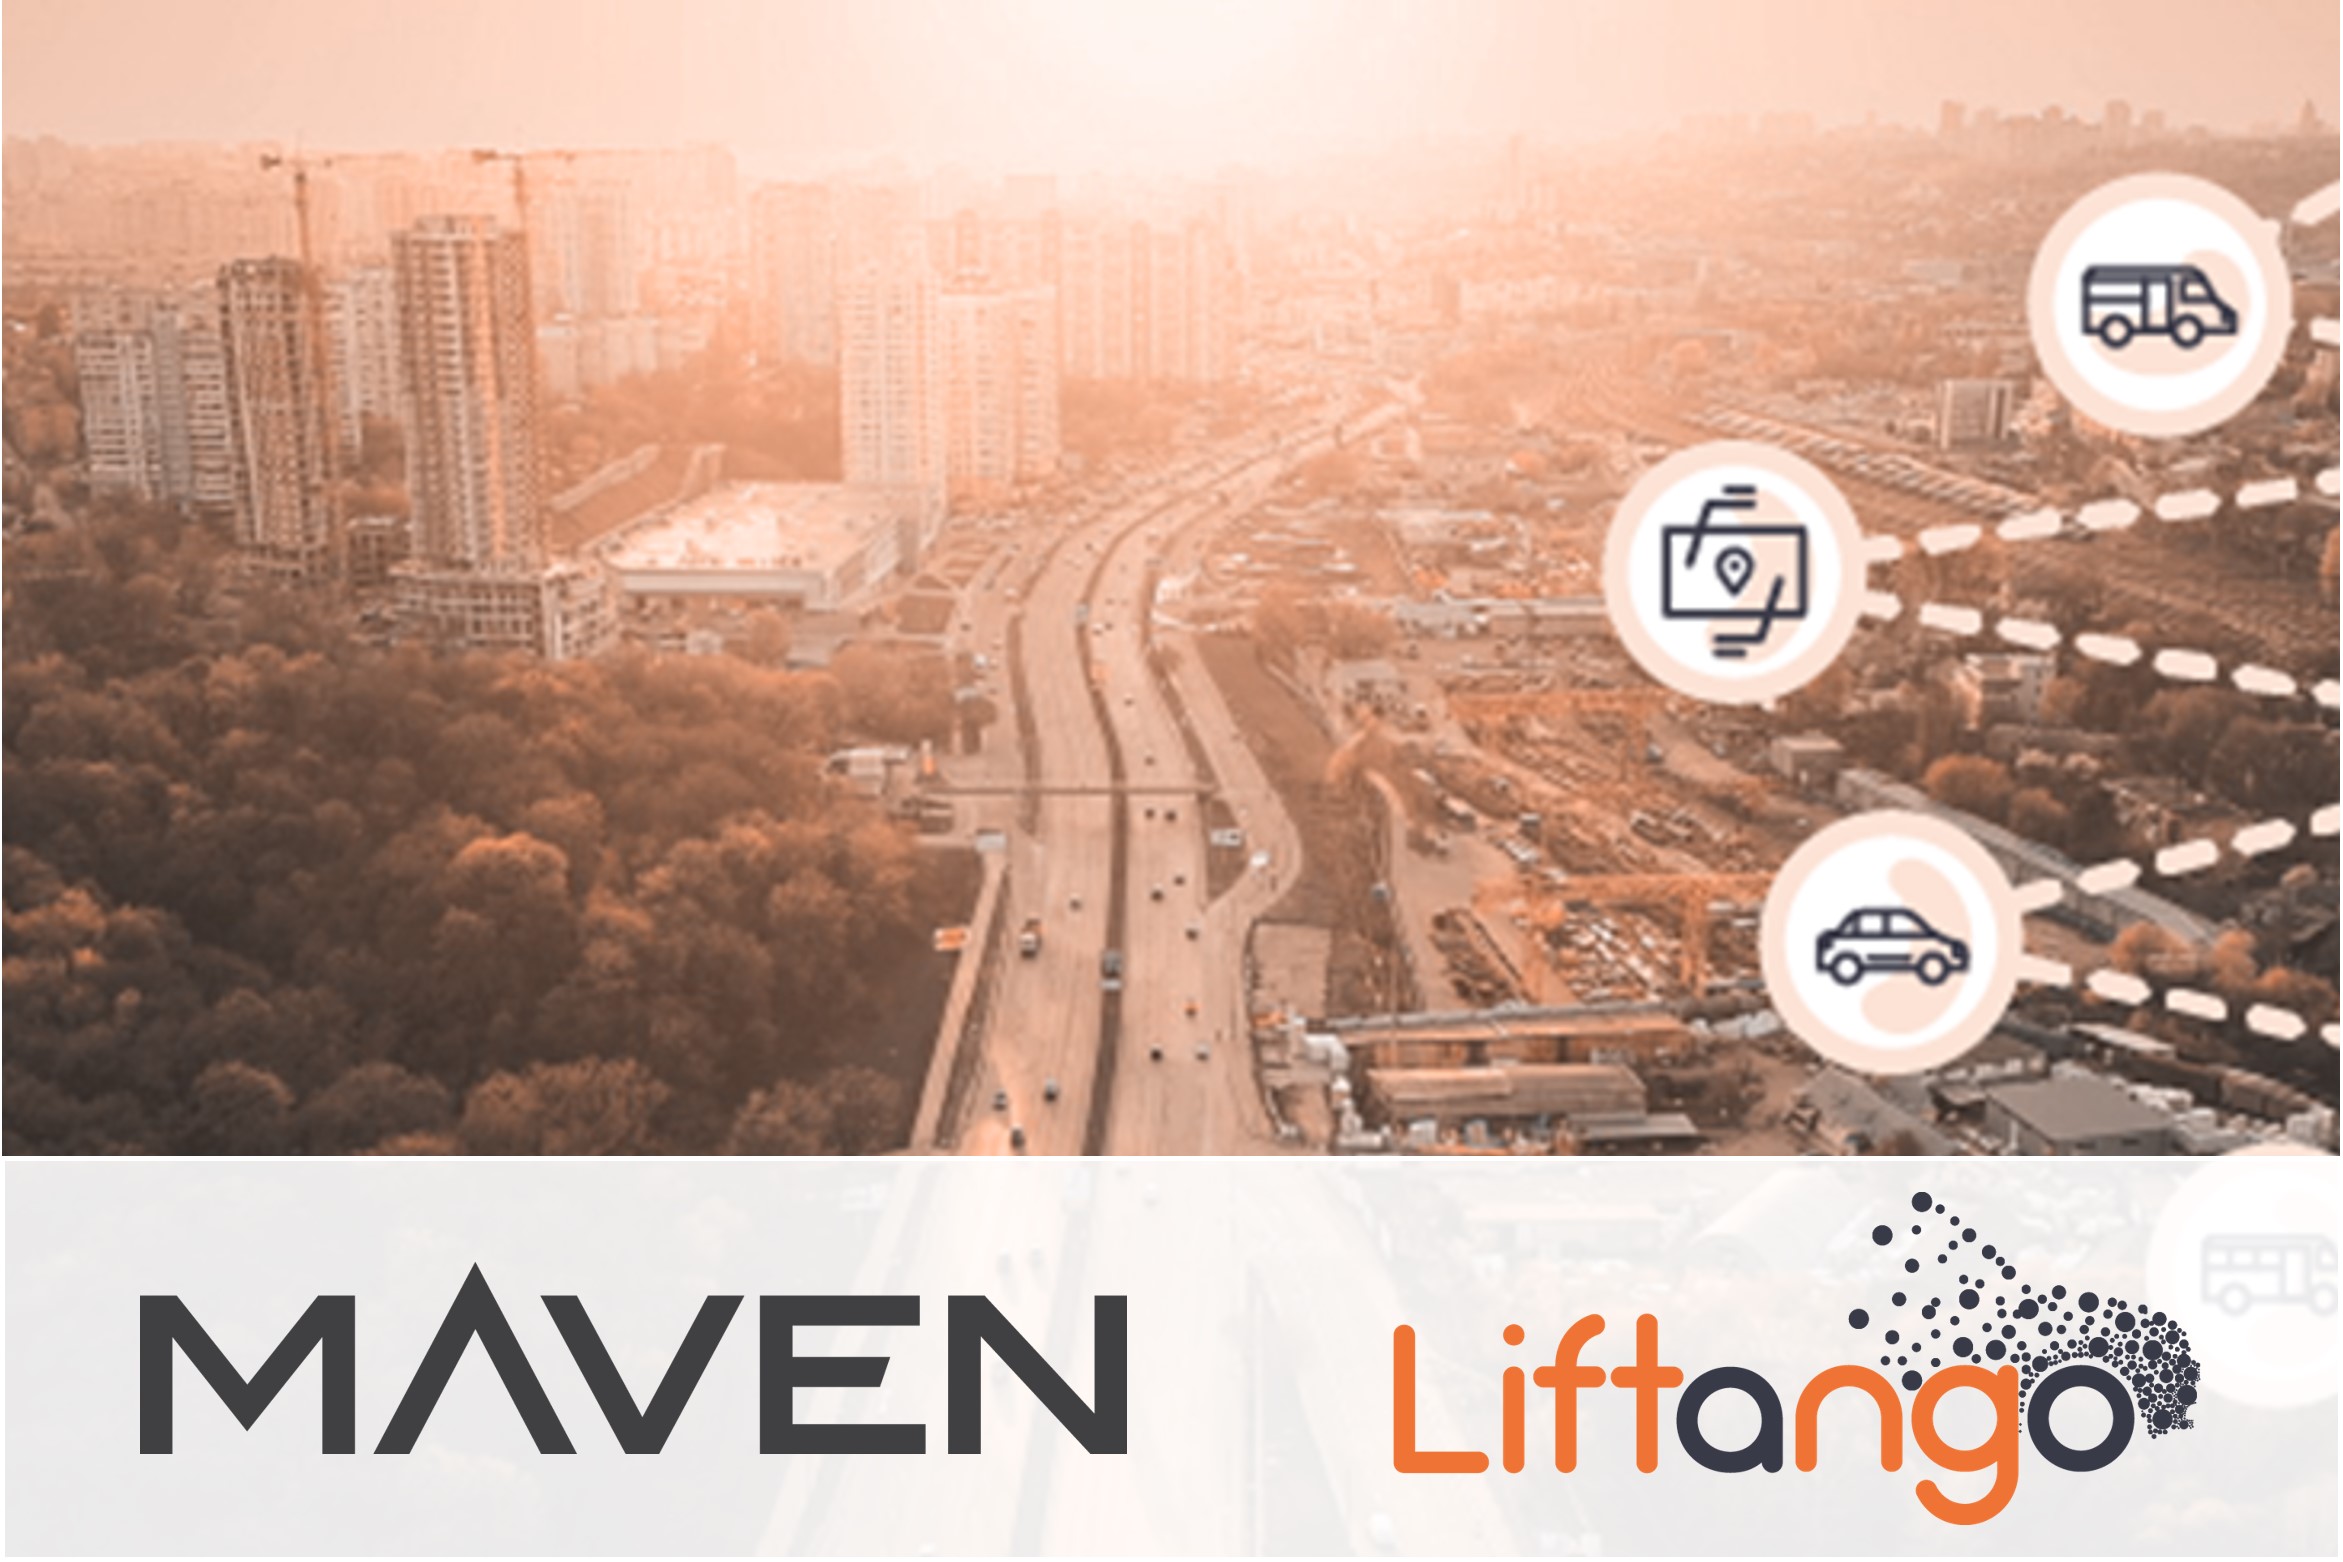 Luminii provides CDD to Maven on their investment in Liftango